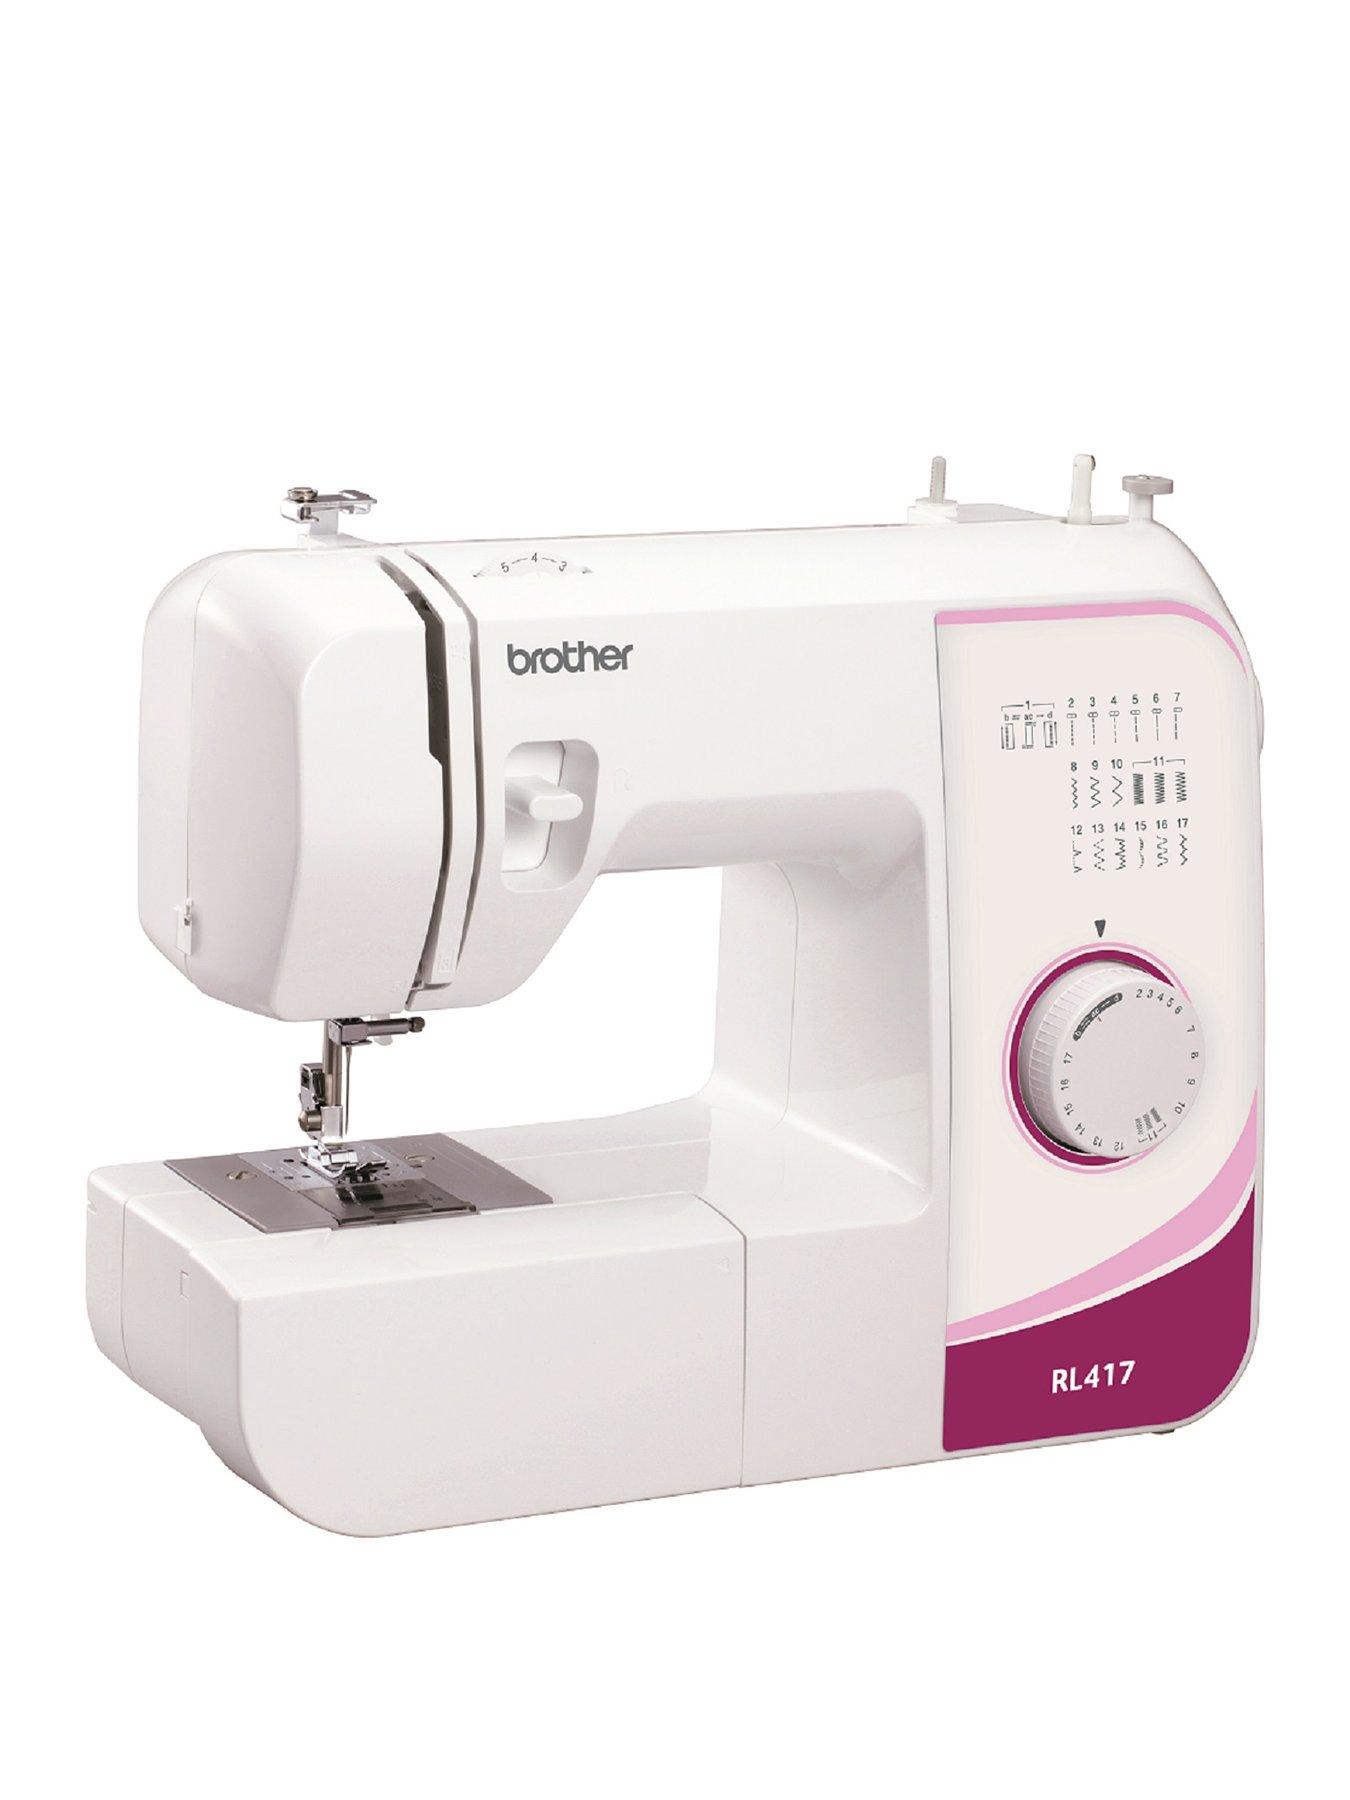 SEWING MACHINE ACCESSORIES FOR BROTHER LS14! TOOLS THAT WILL HELP YOU SEW  BETTER / Sewing Adventures 